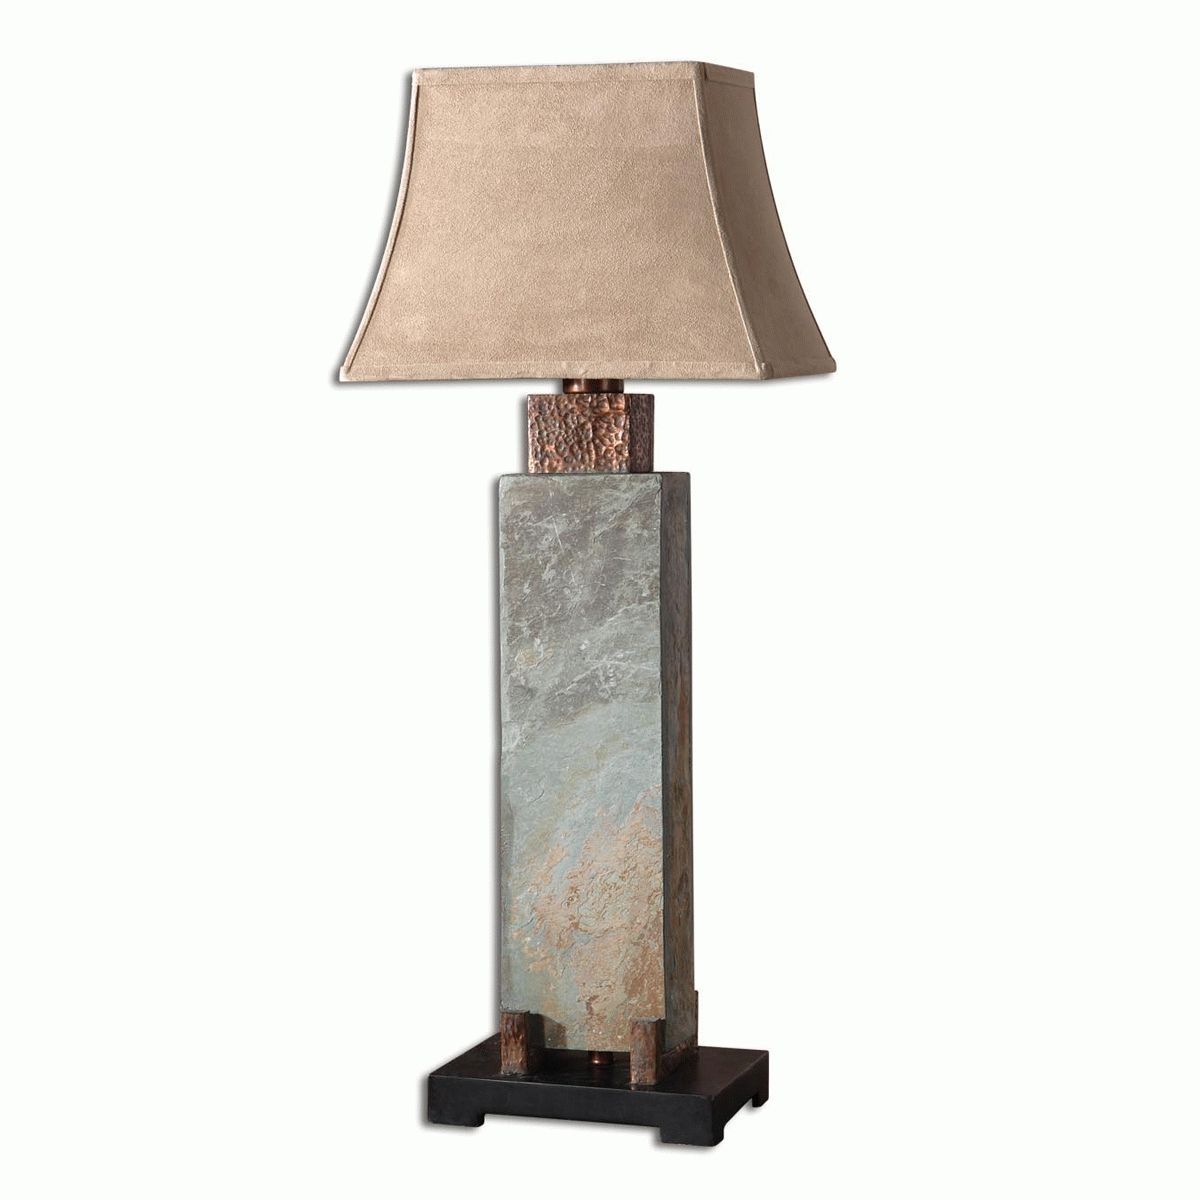 The Best Console Gorgeous Rustic Table Western Modern Picture Of Inside Western Table Lamps For Living Room (View 11 of 15)